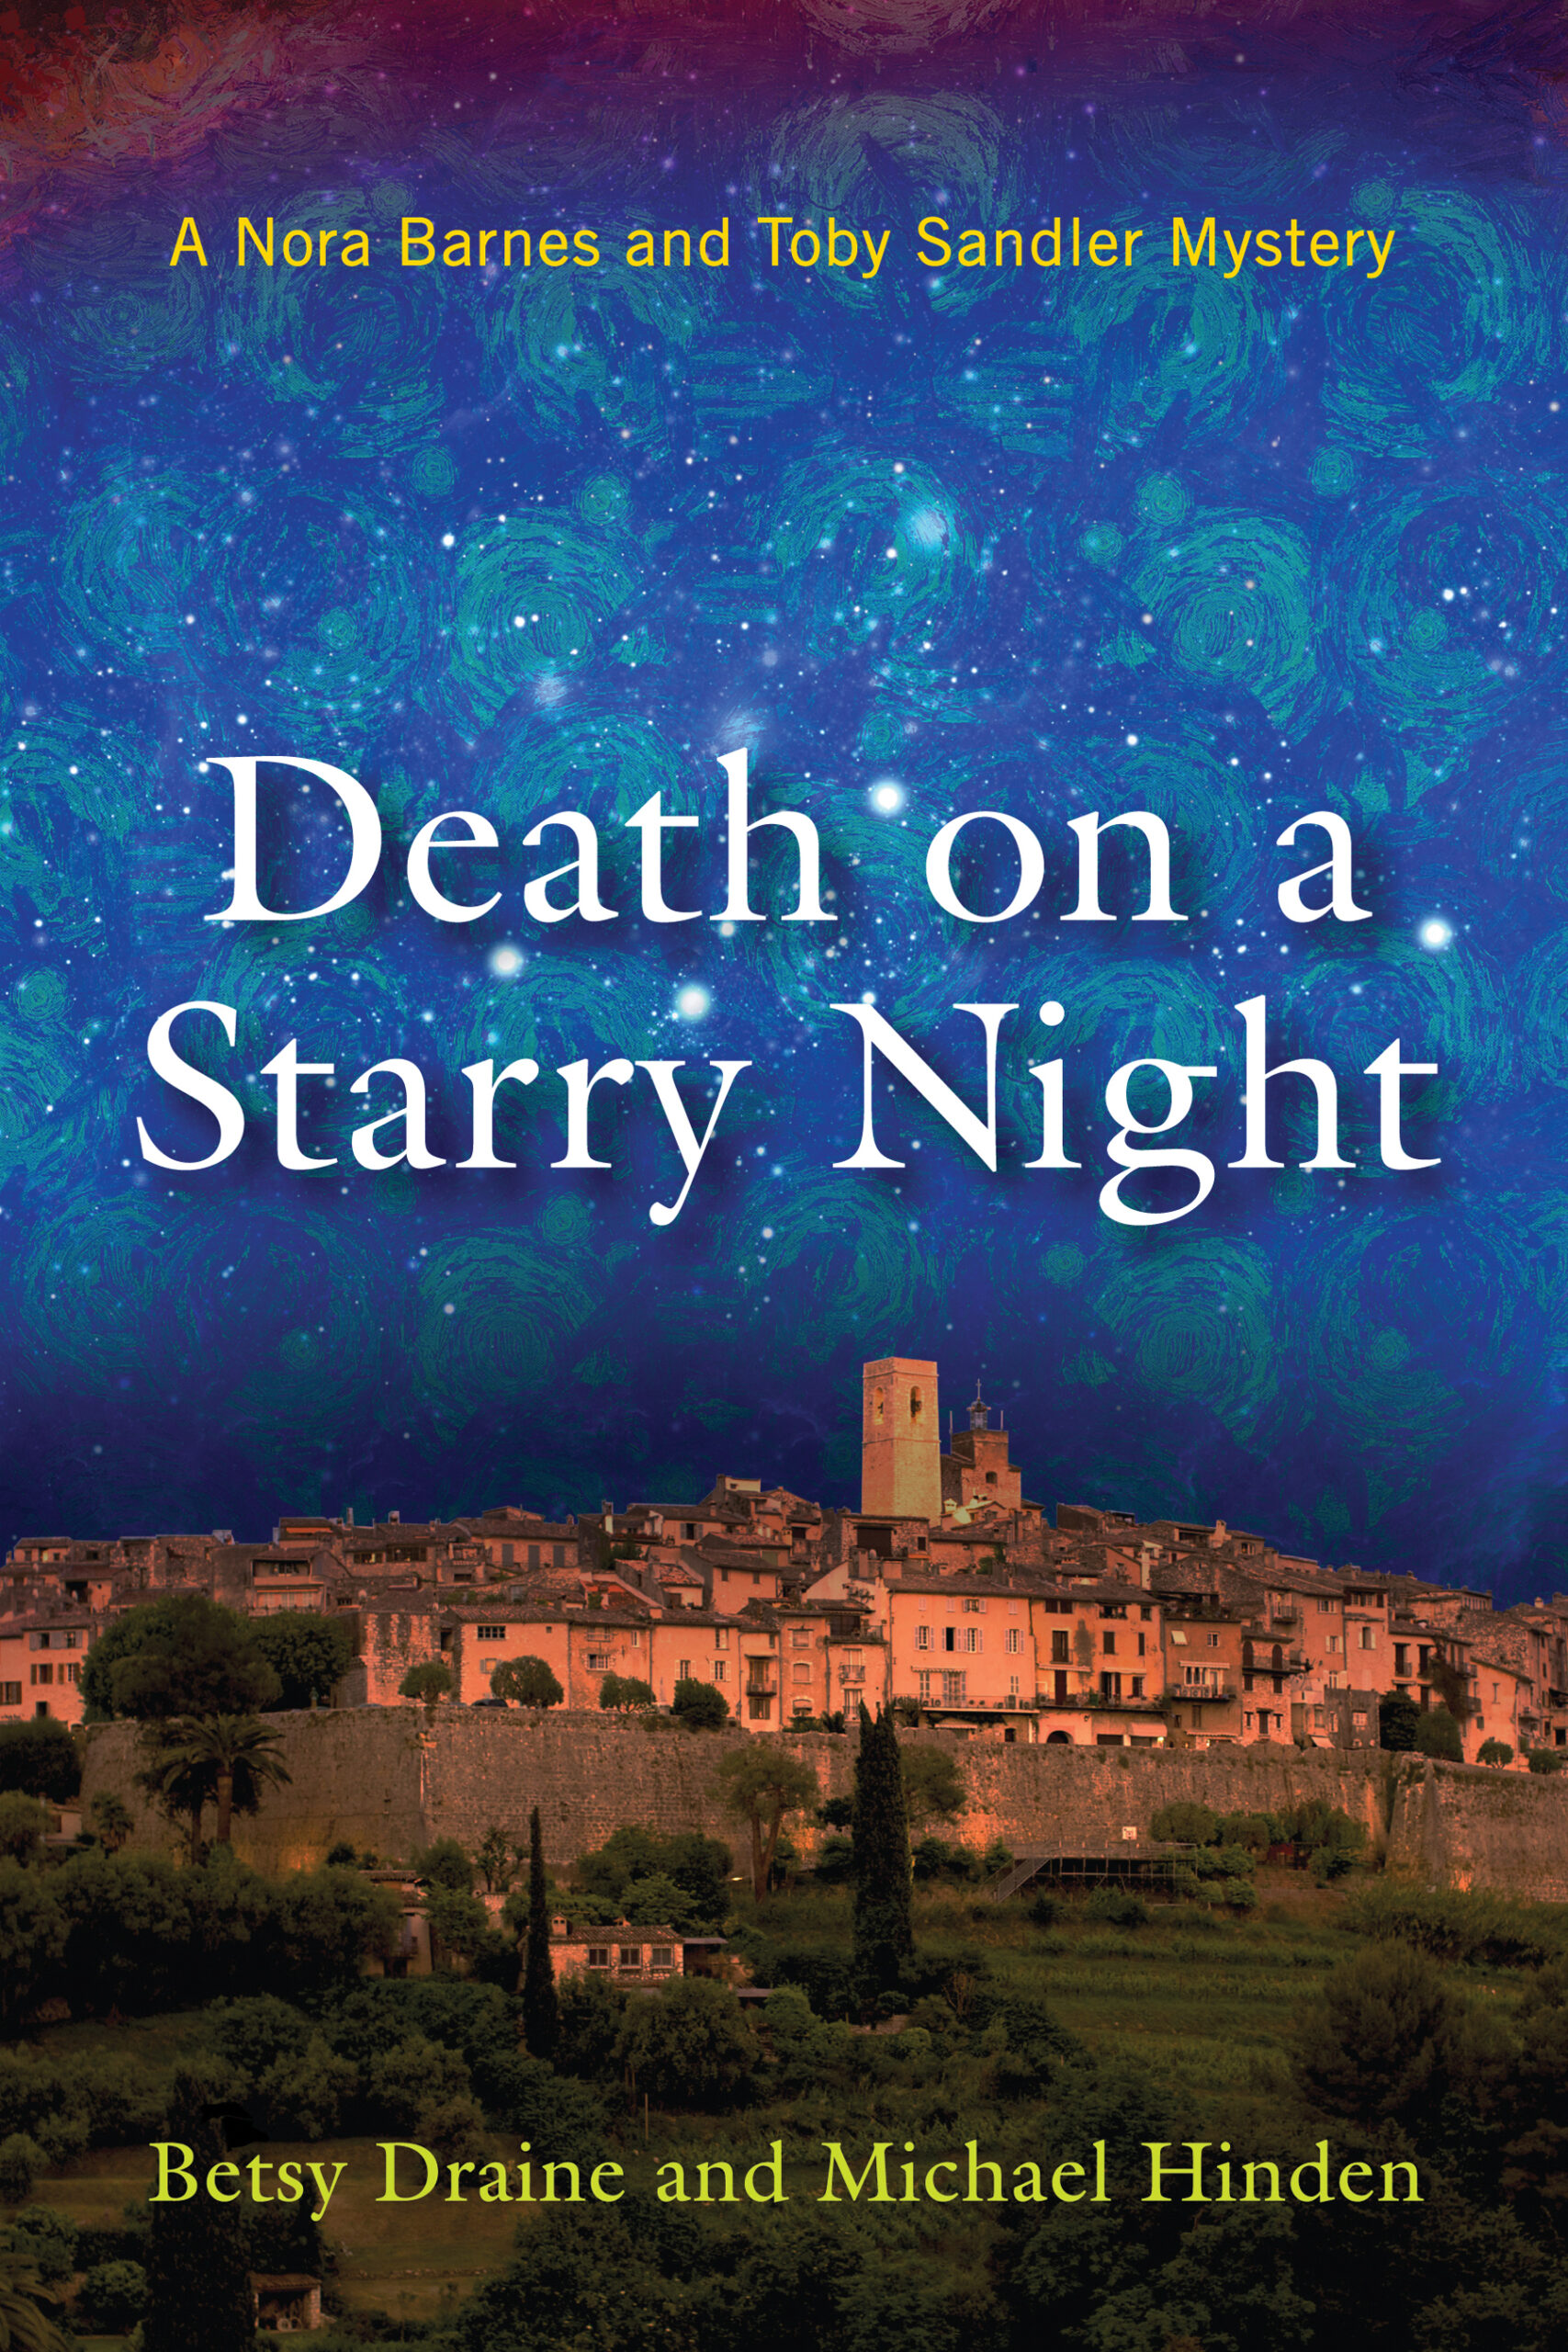 Death on a Starry Night book cover